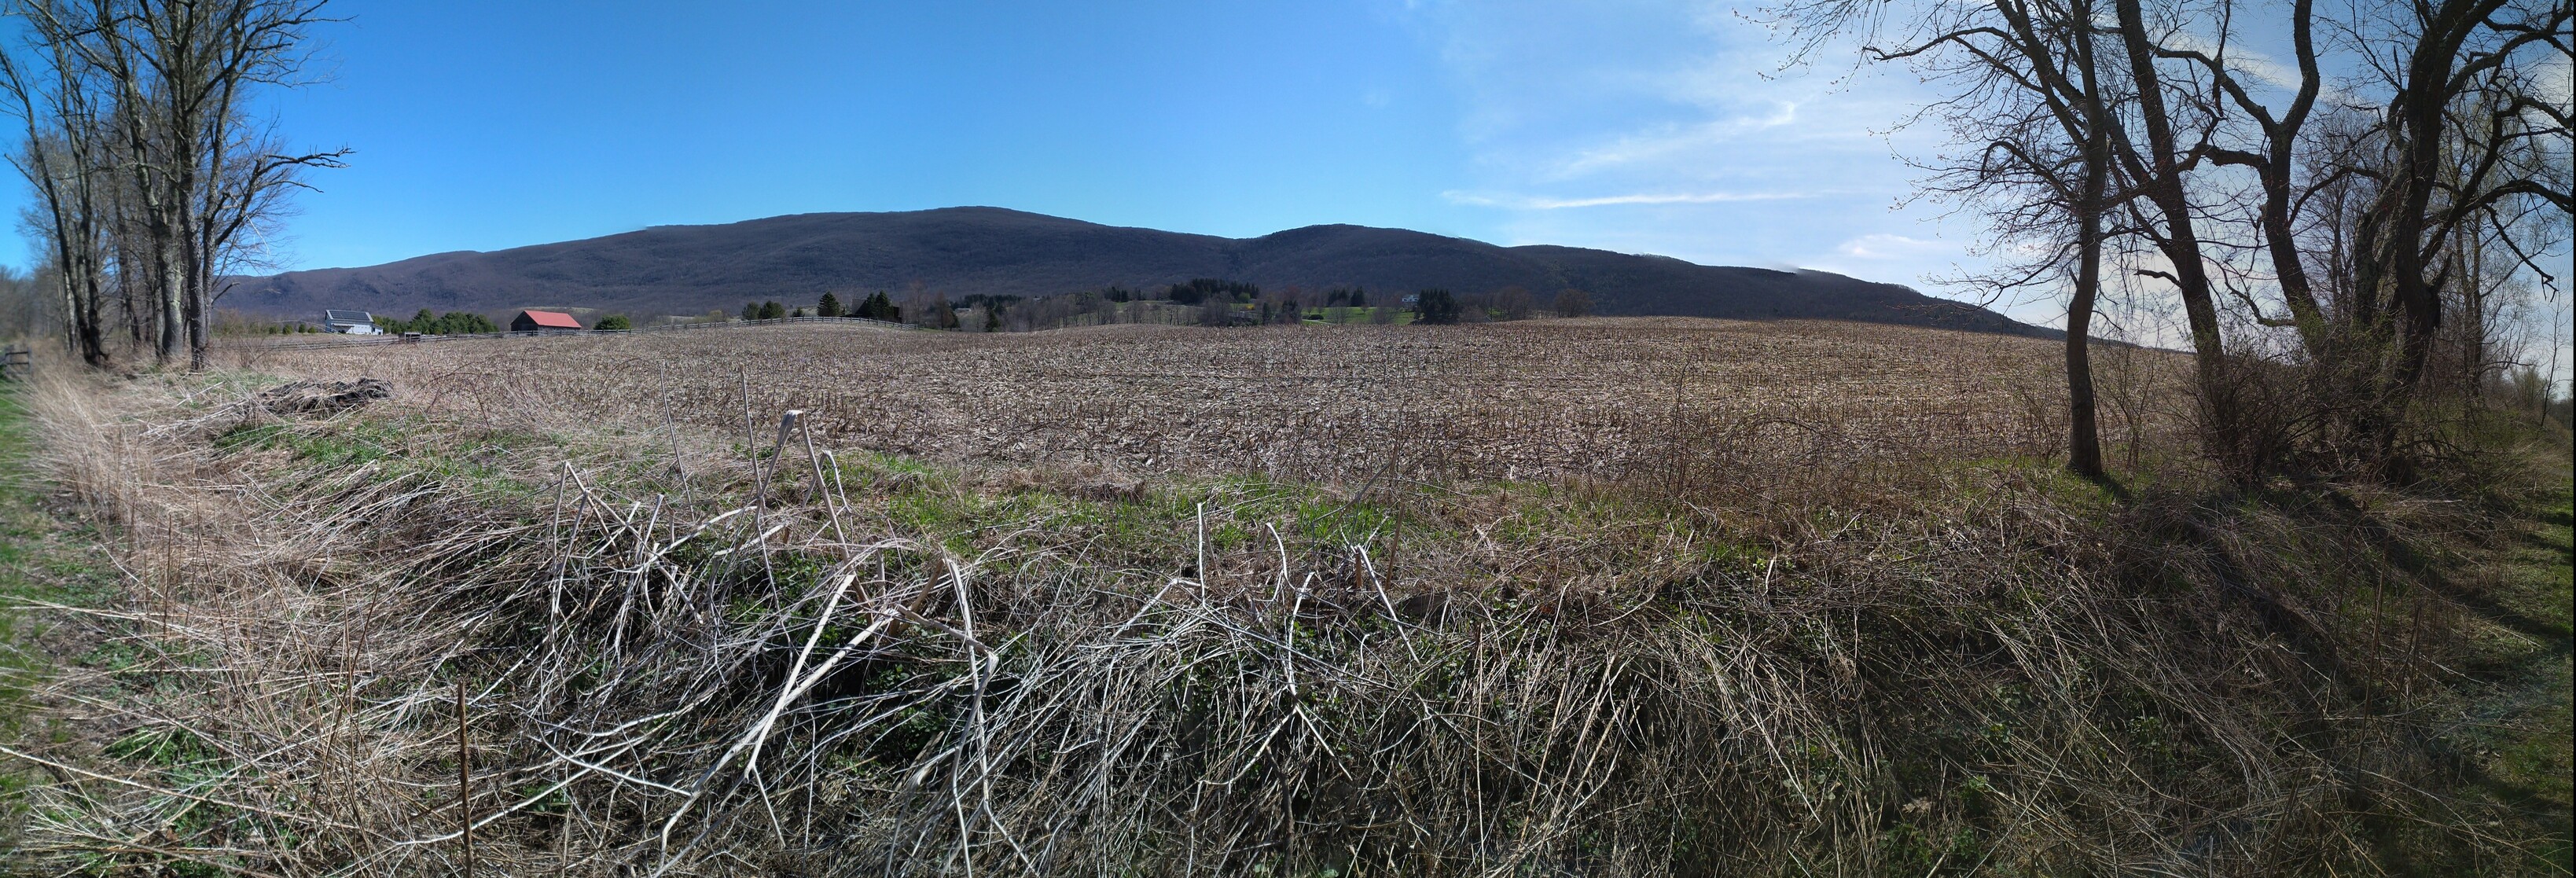 Taconic Mountains